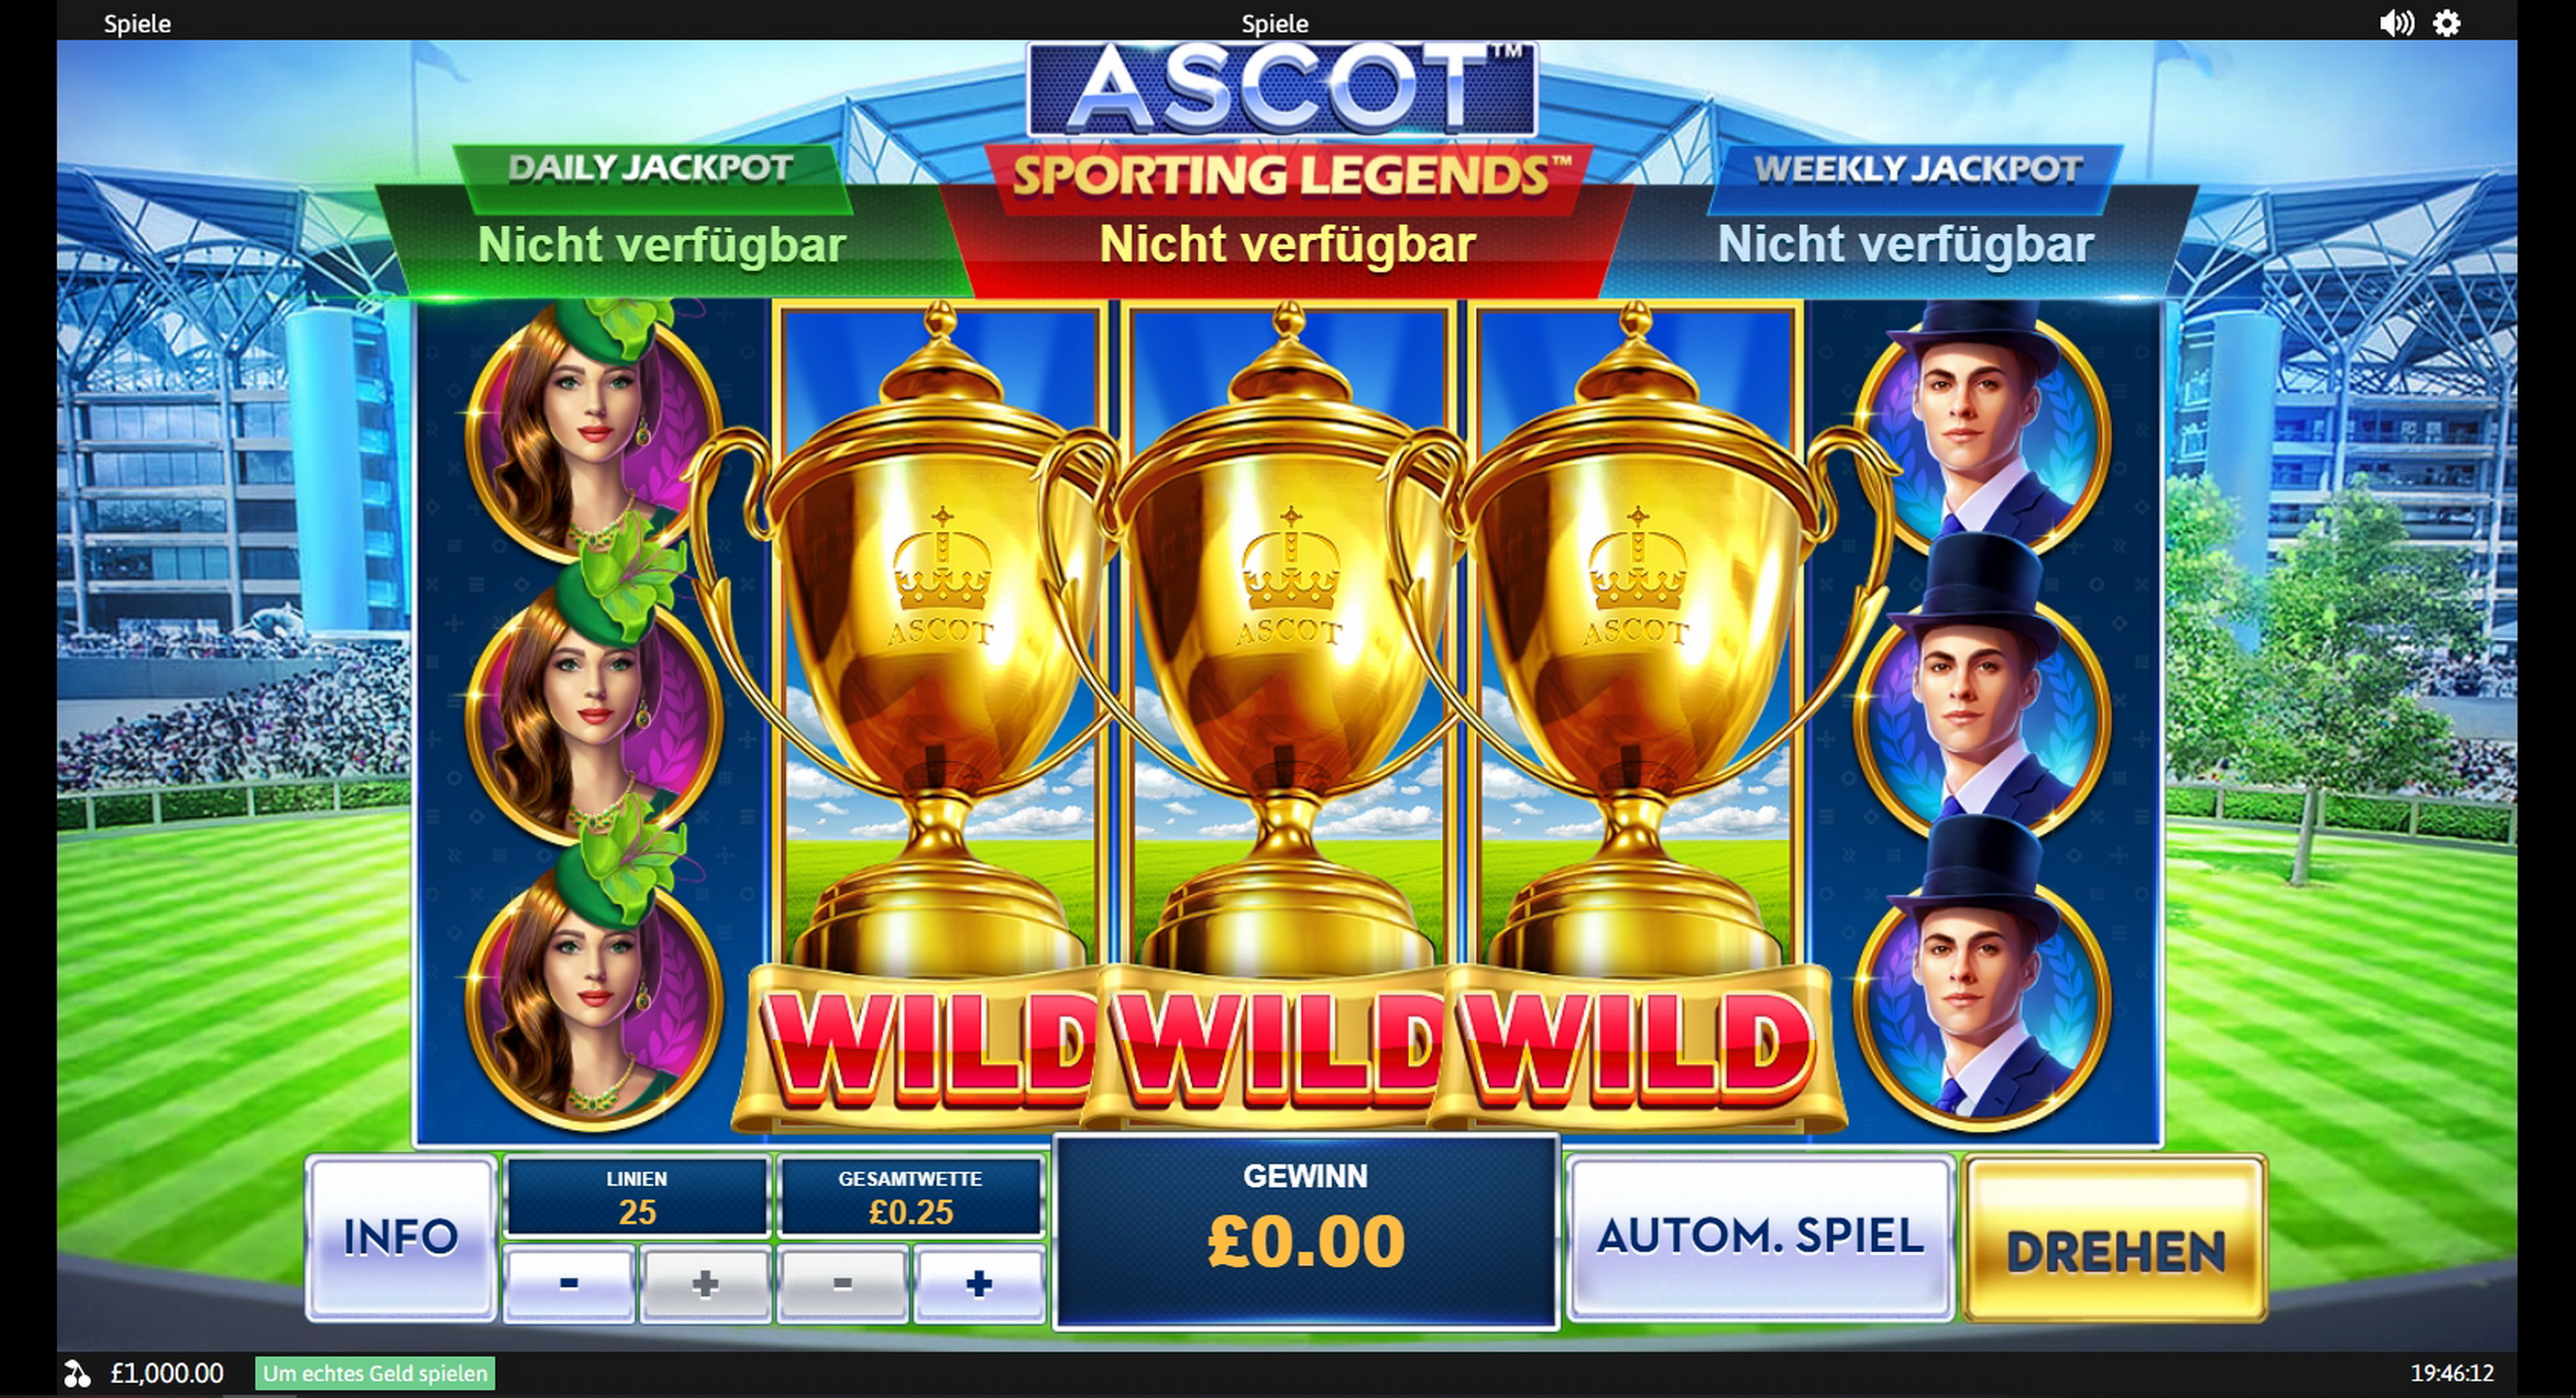 Reels in Ascot - Sporting Legends Slot Game by Playtech